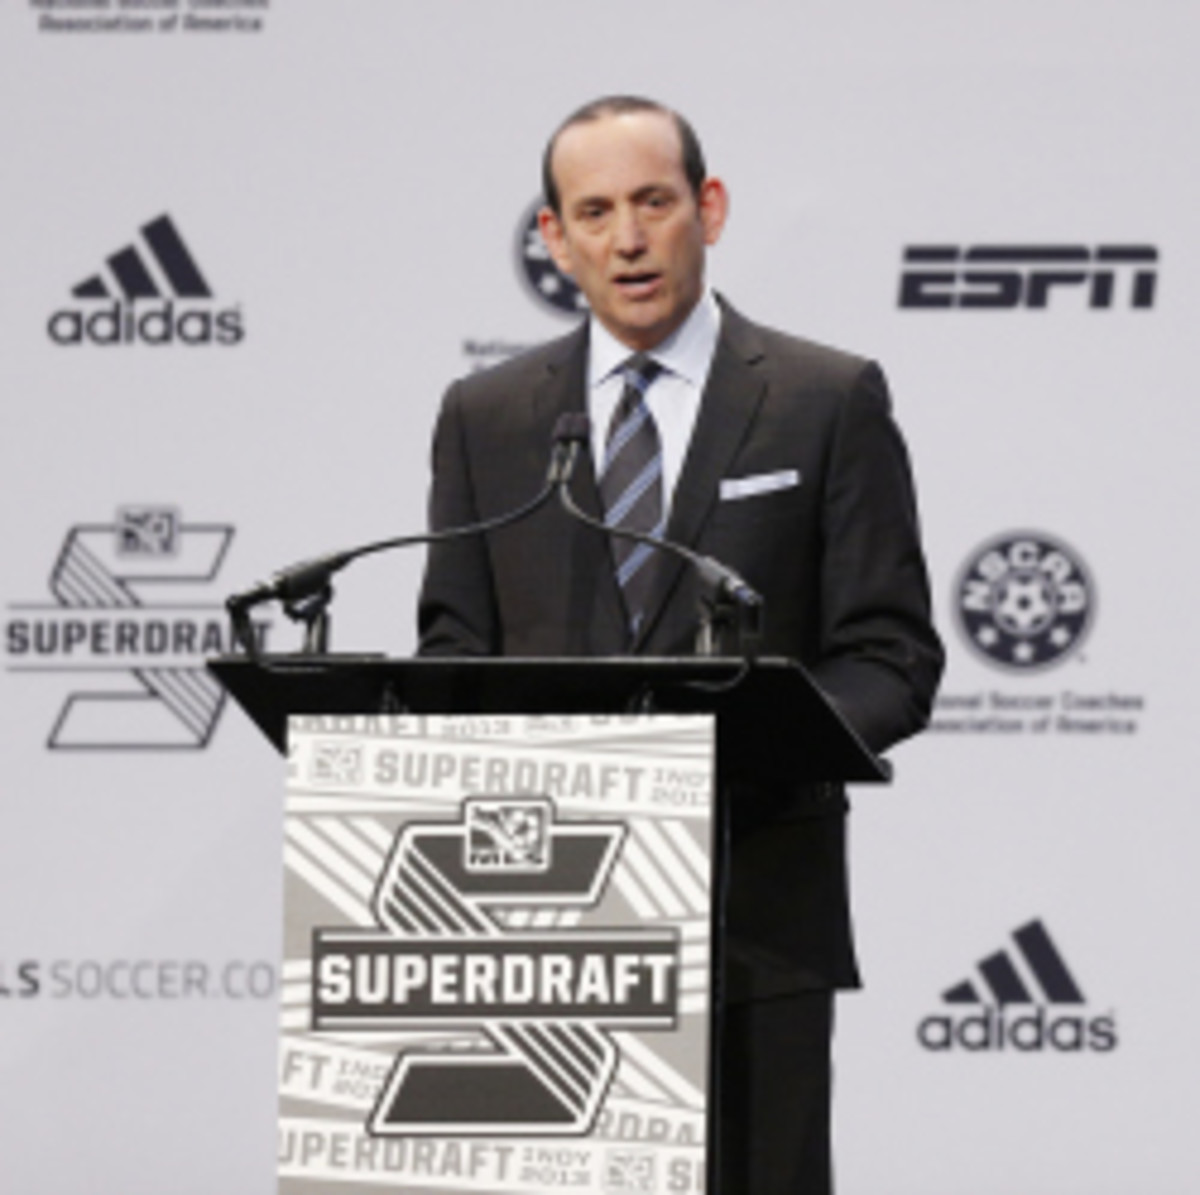 MLS Commissioner Don Garber said the league would not install goal-line technology due to high costs. (Joe Robbins/Getty Images)